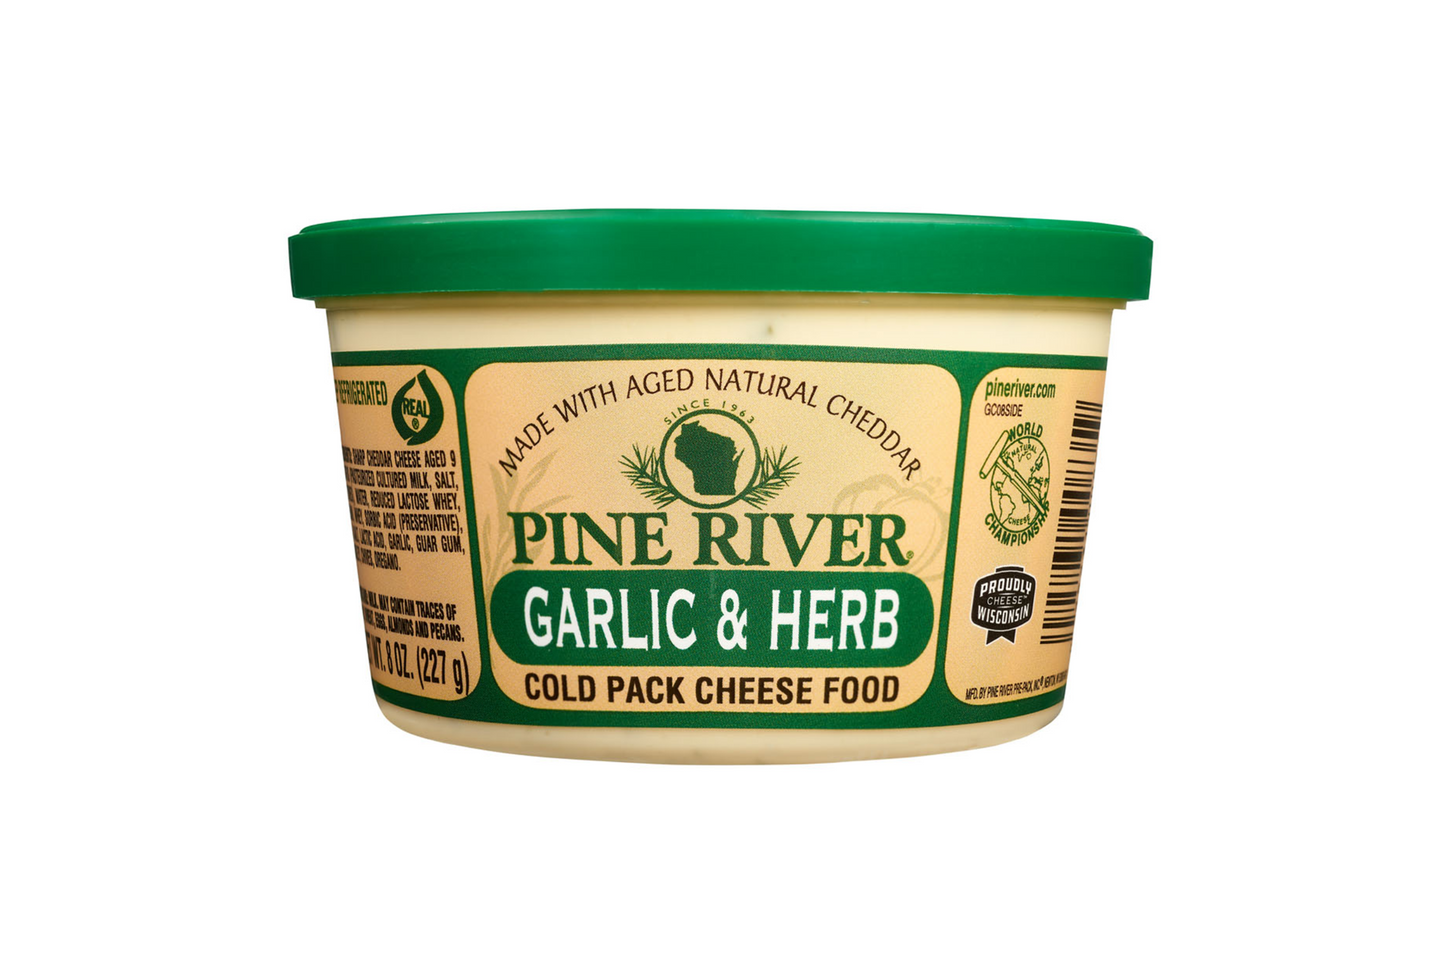 Garlic & Herb Cold Pack Cheese Spread